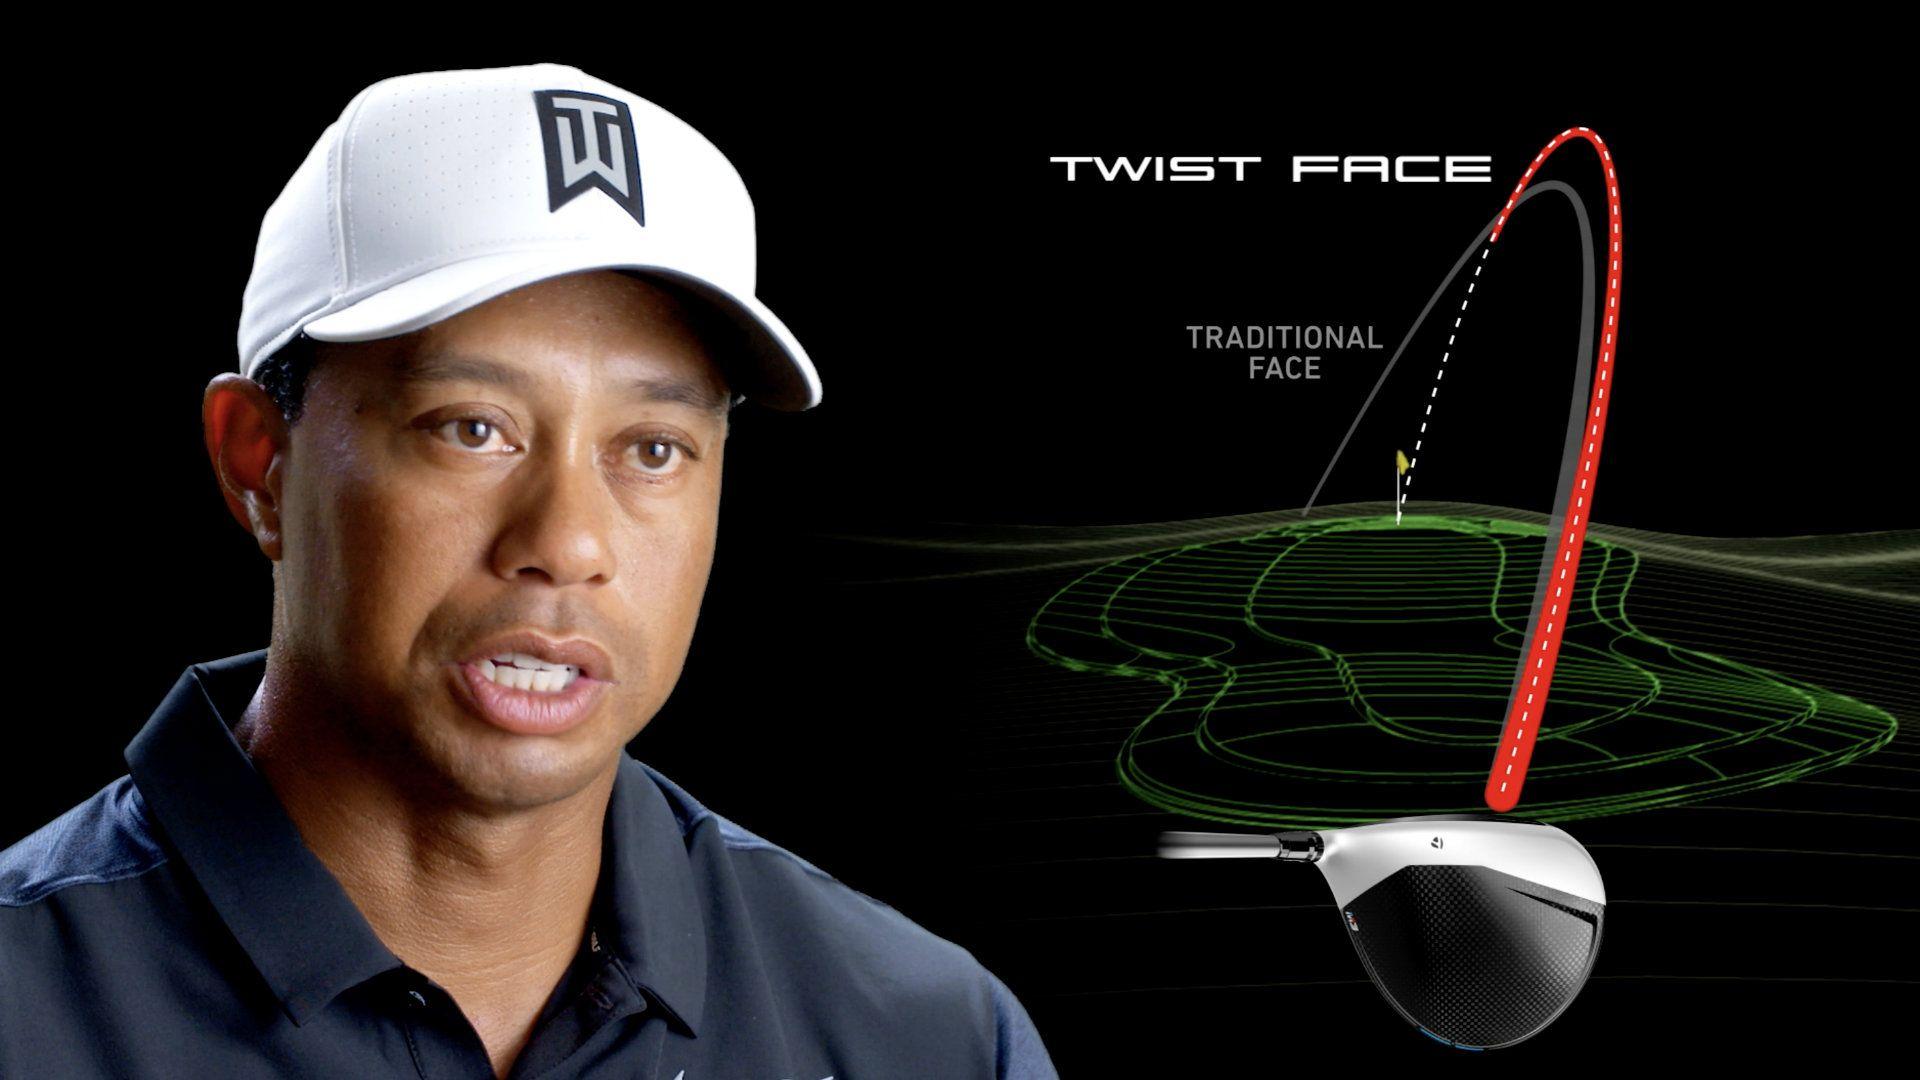 Sponsored: Tiger Woods with a Twist Face